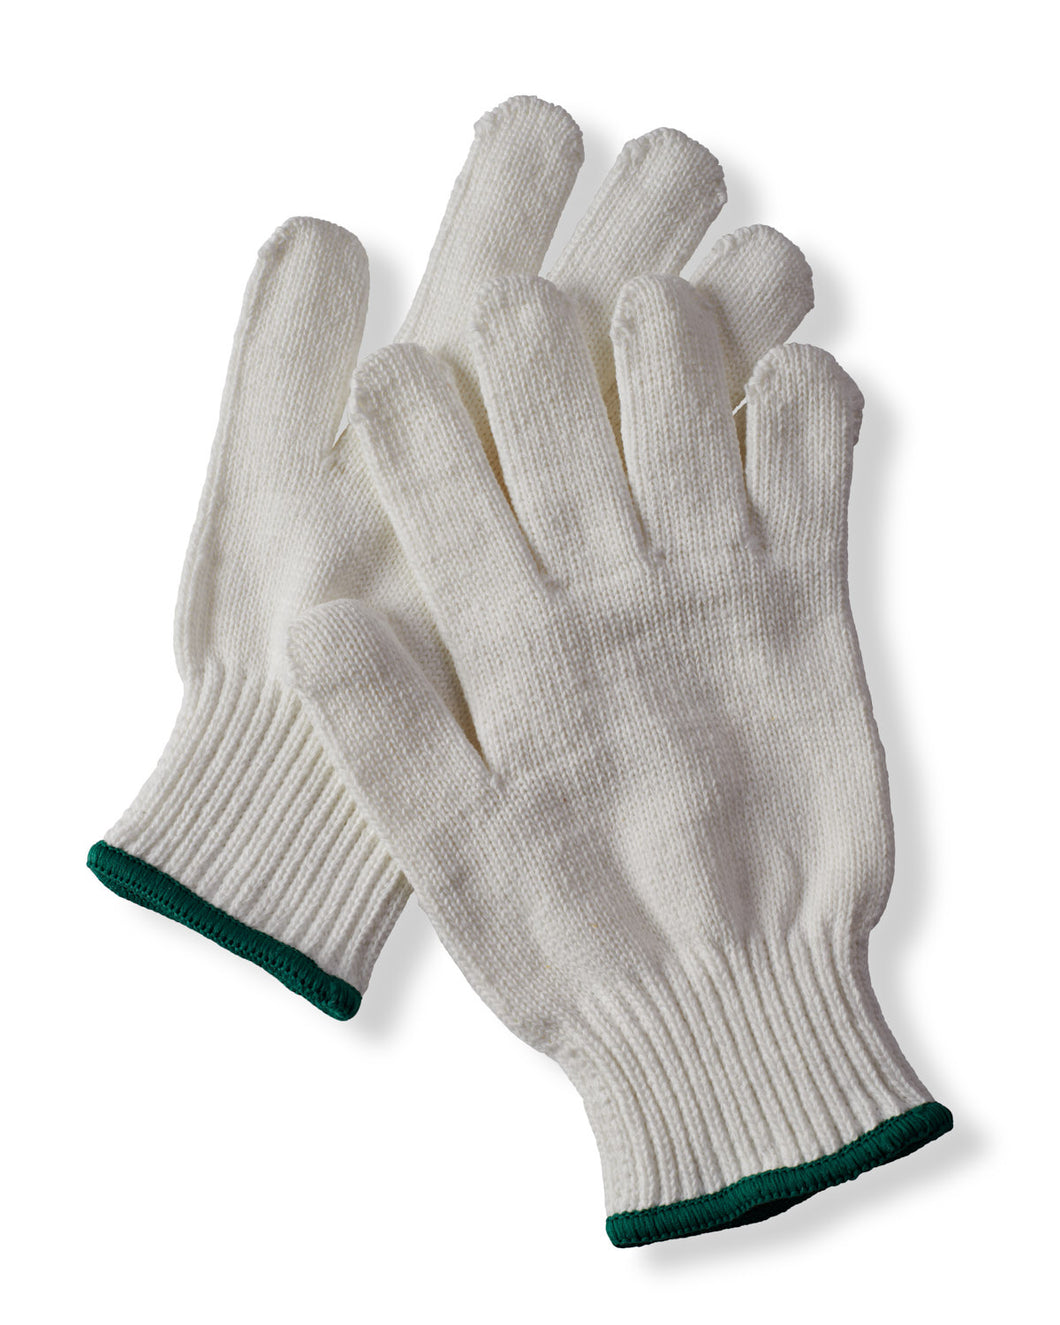 Cotton Knit Gloves 12 Pairs Pack